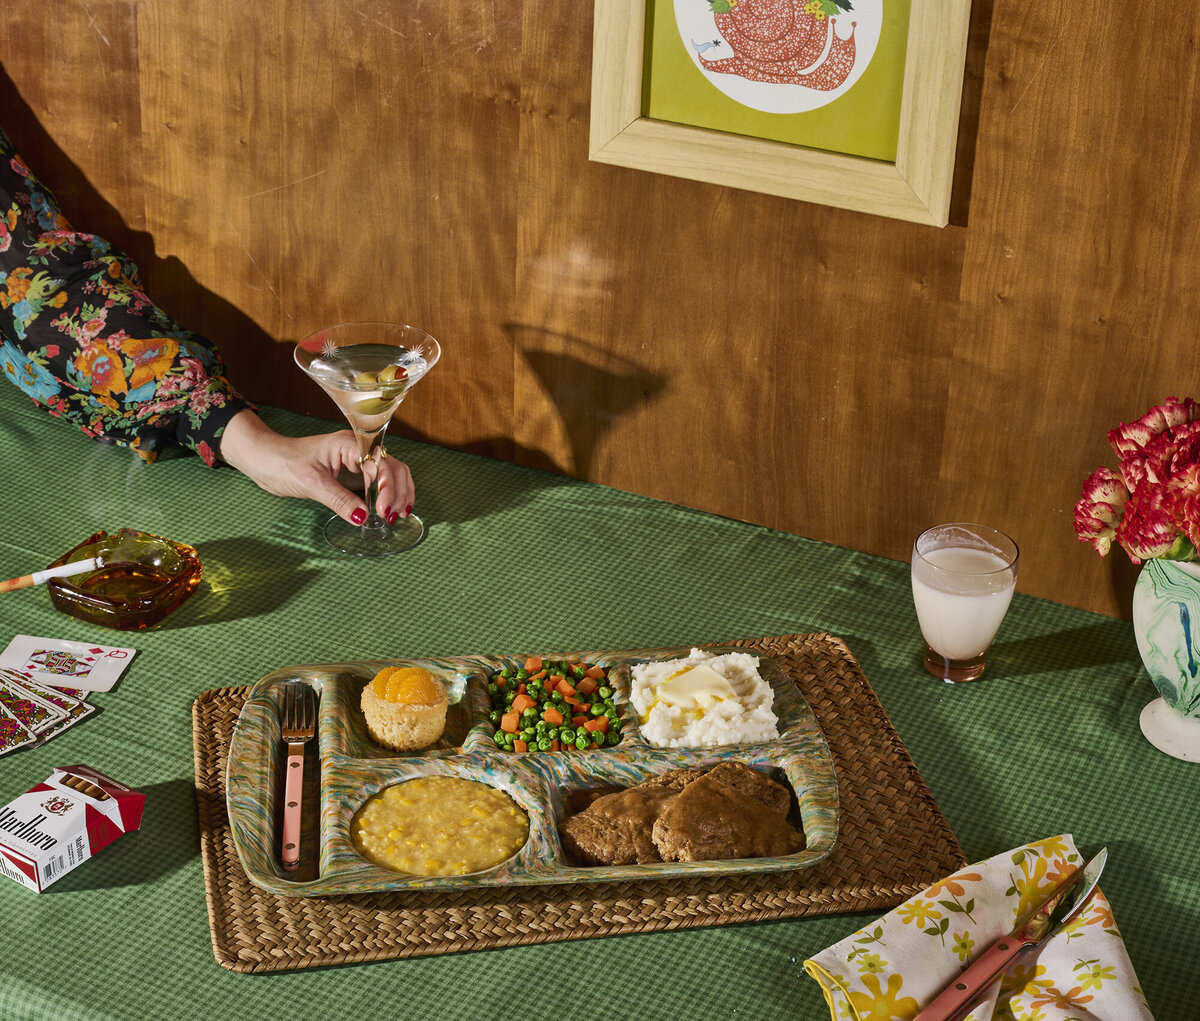 1970s themed photoshoot with martini and tv dinner